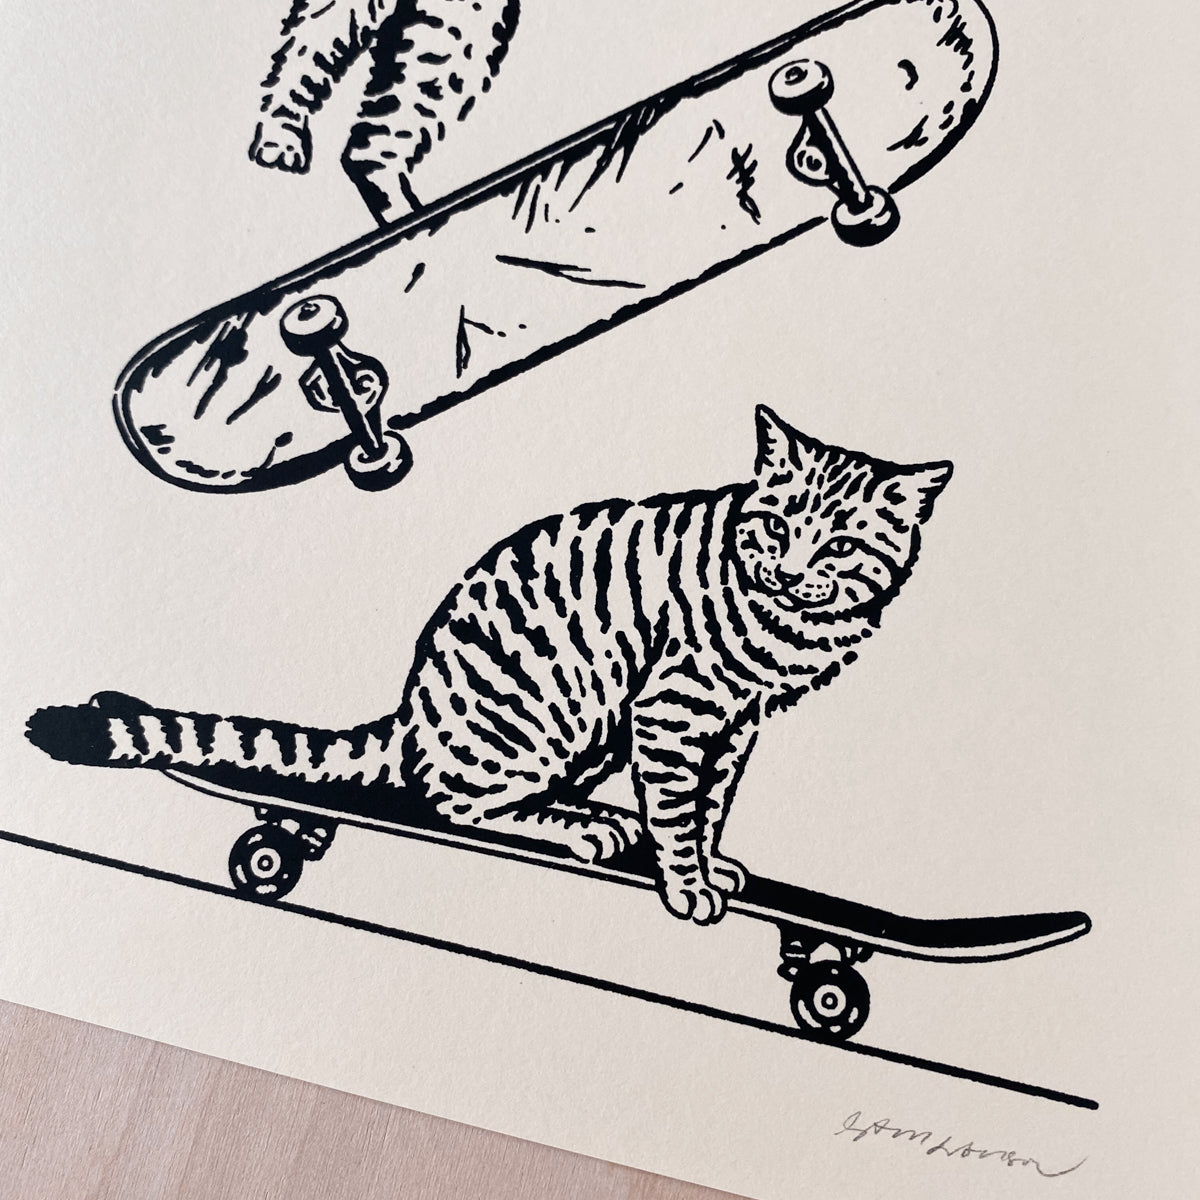 SOLD OUT. Skate Cats - Signed 8x10in Print #297